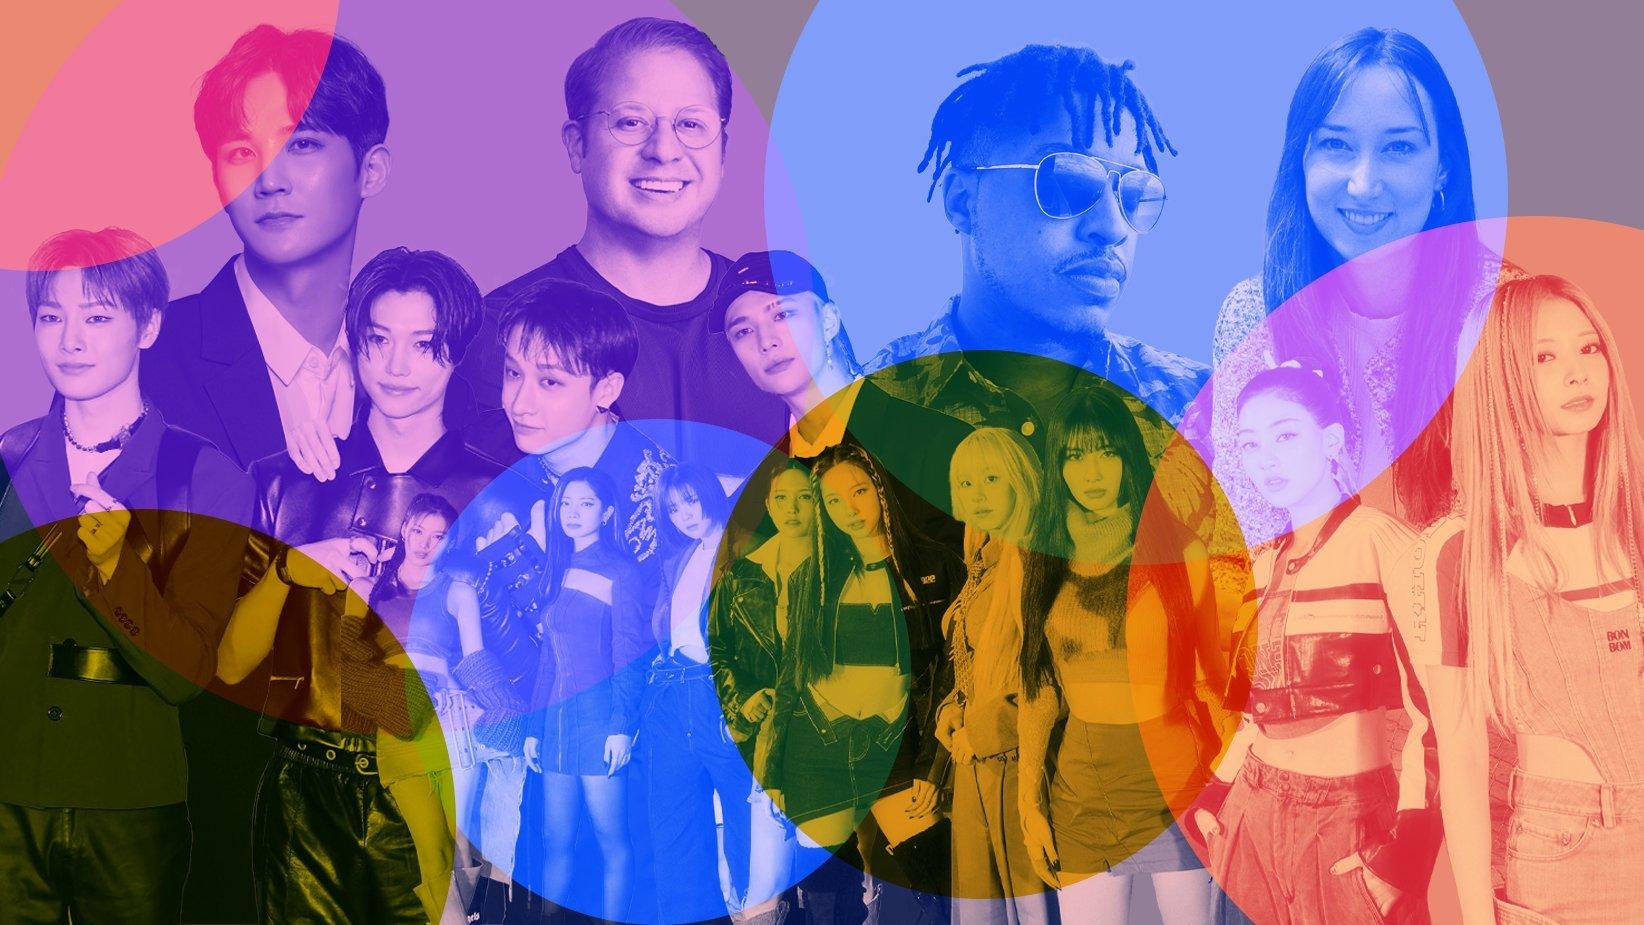 Kpop_State Of The Union artist collage